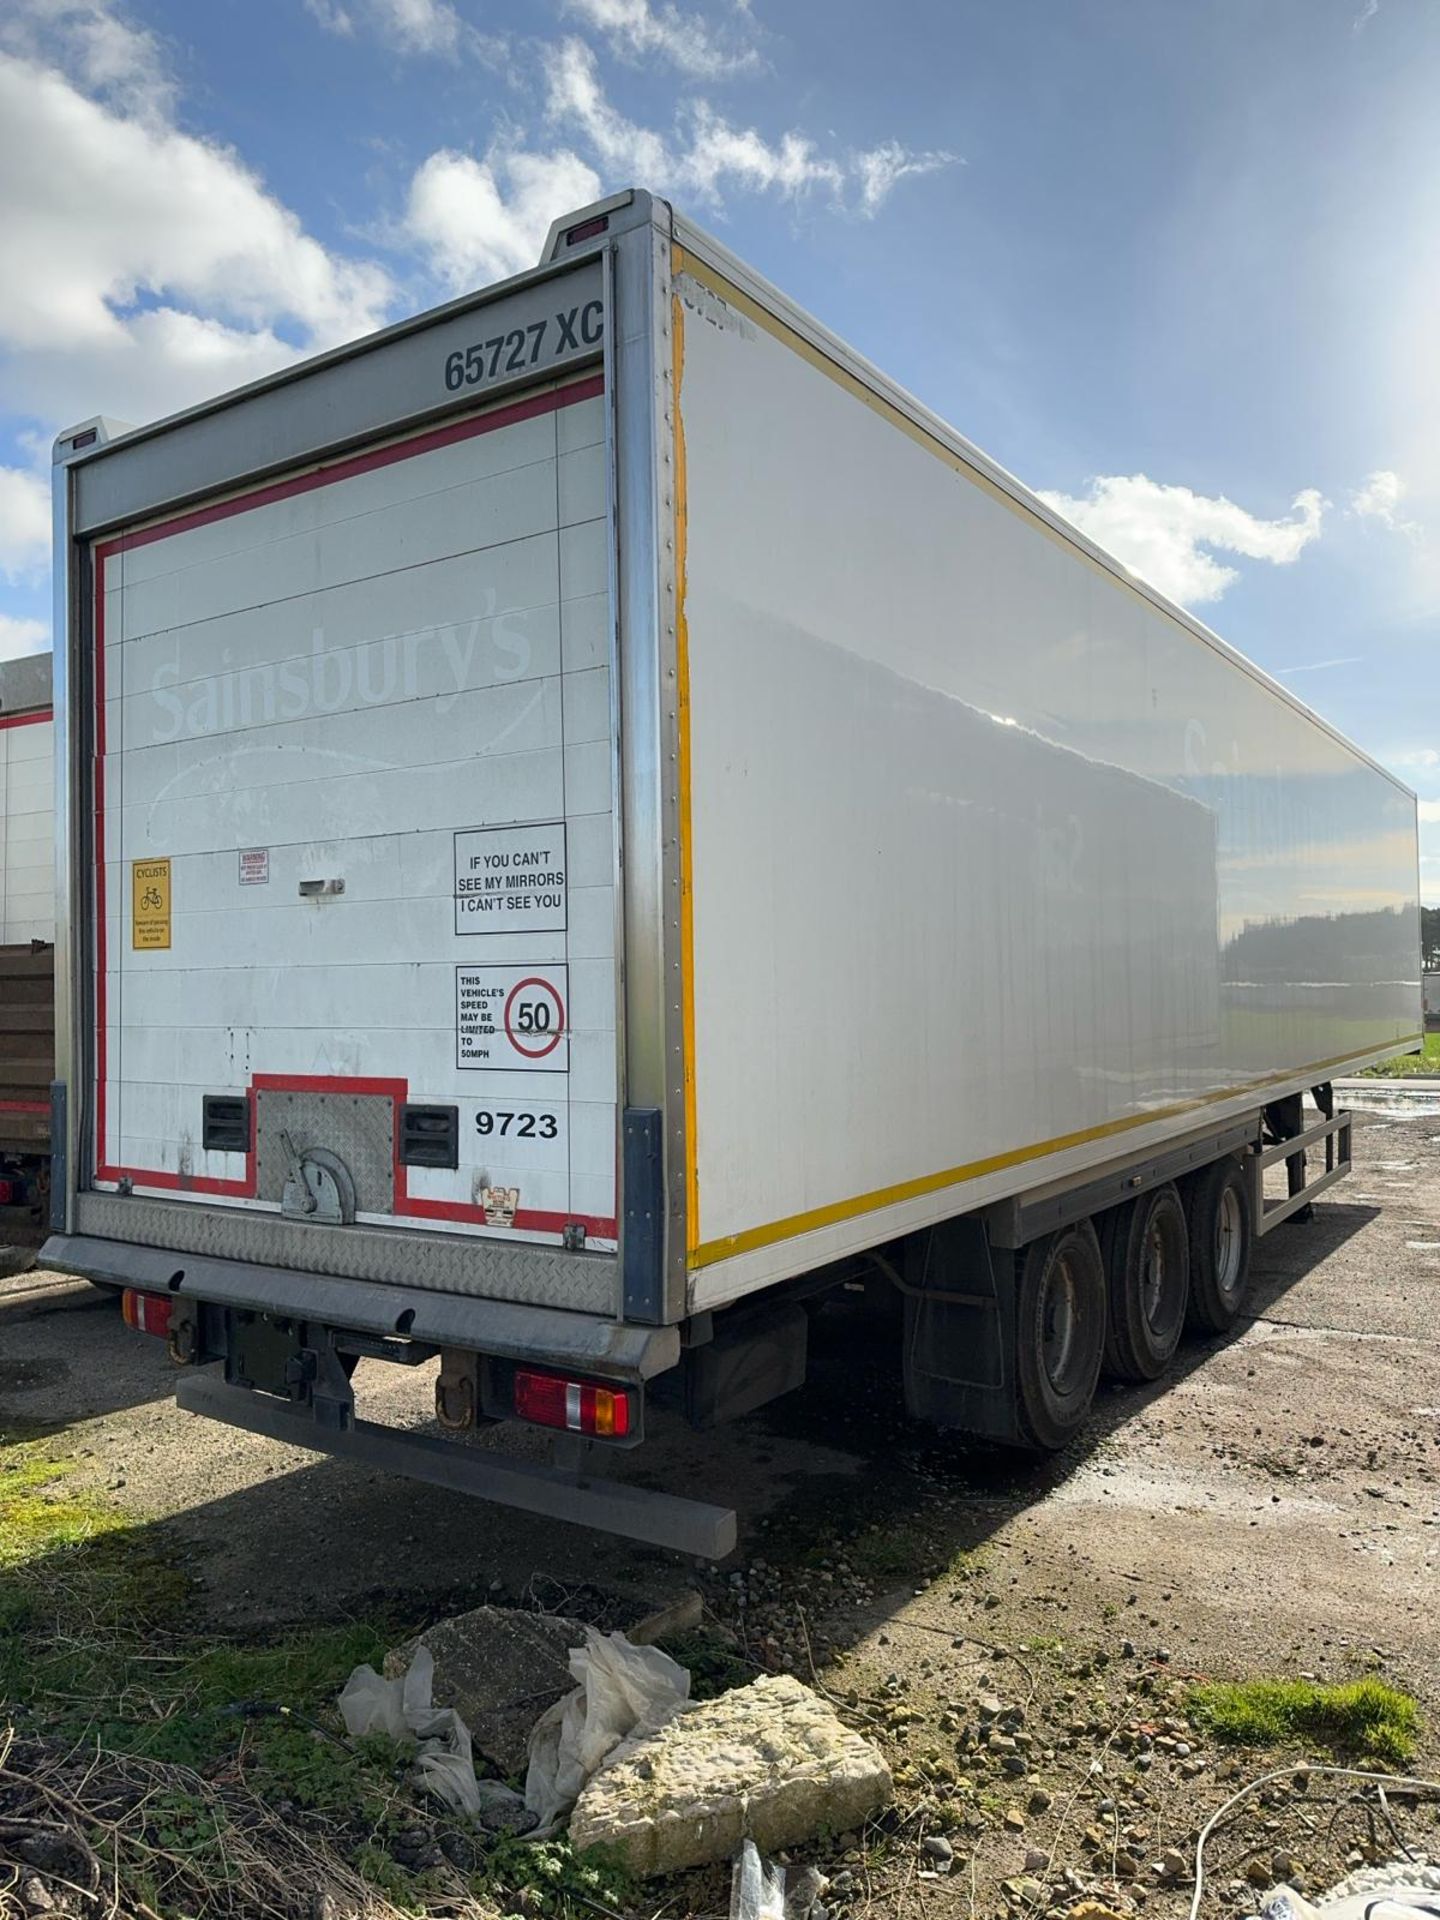 65727XC – 2015 Montracon 13.6m Refrigerated Trailer - Image 4 of 11